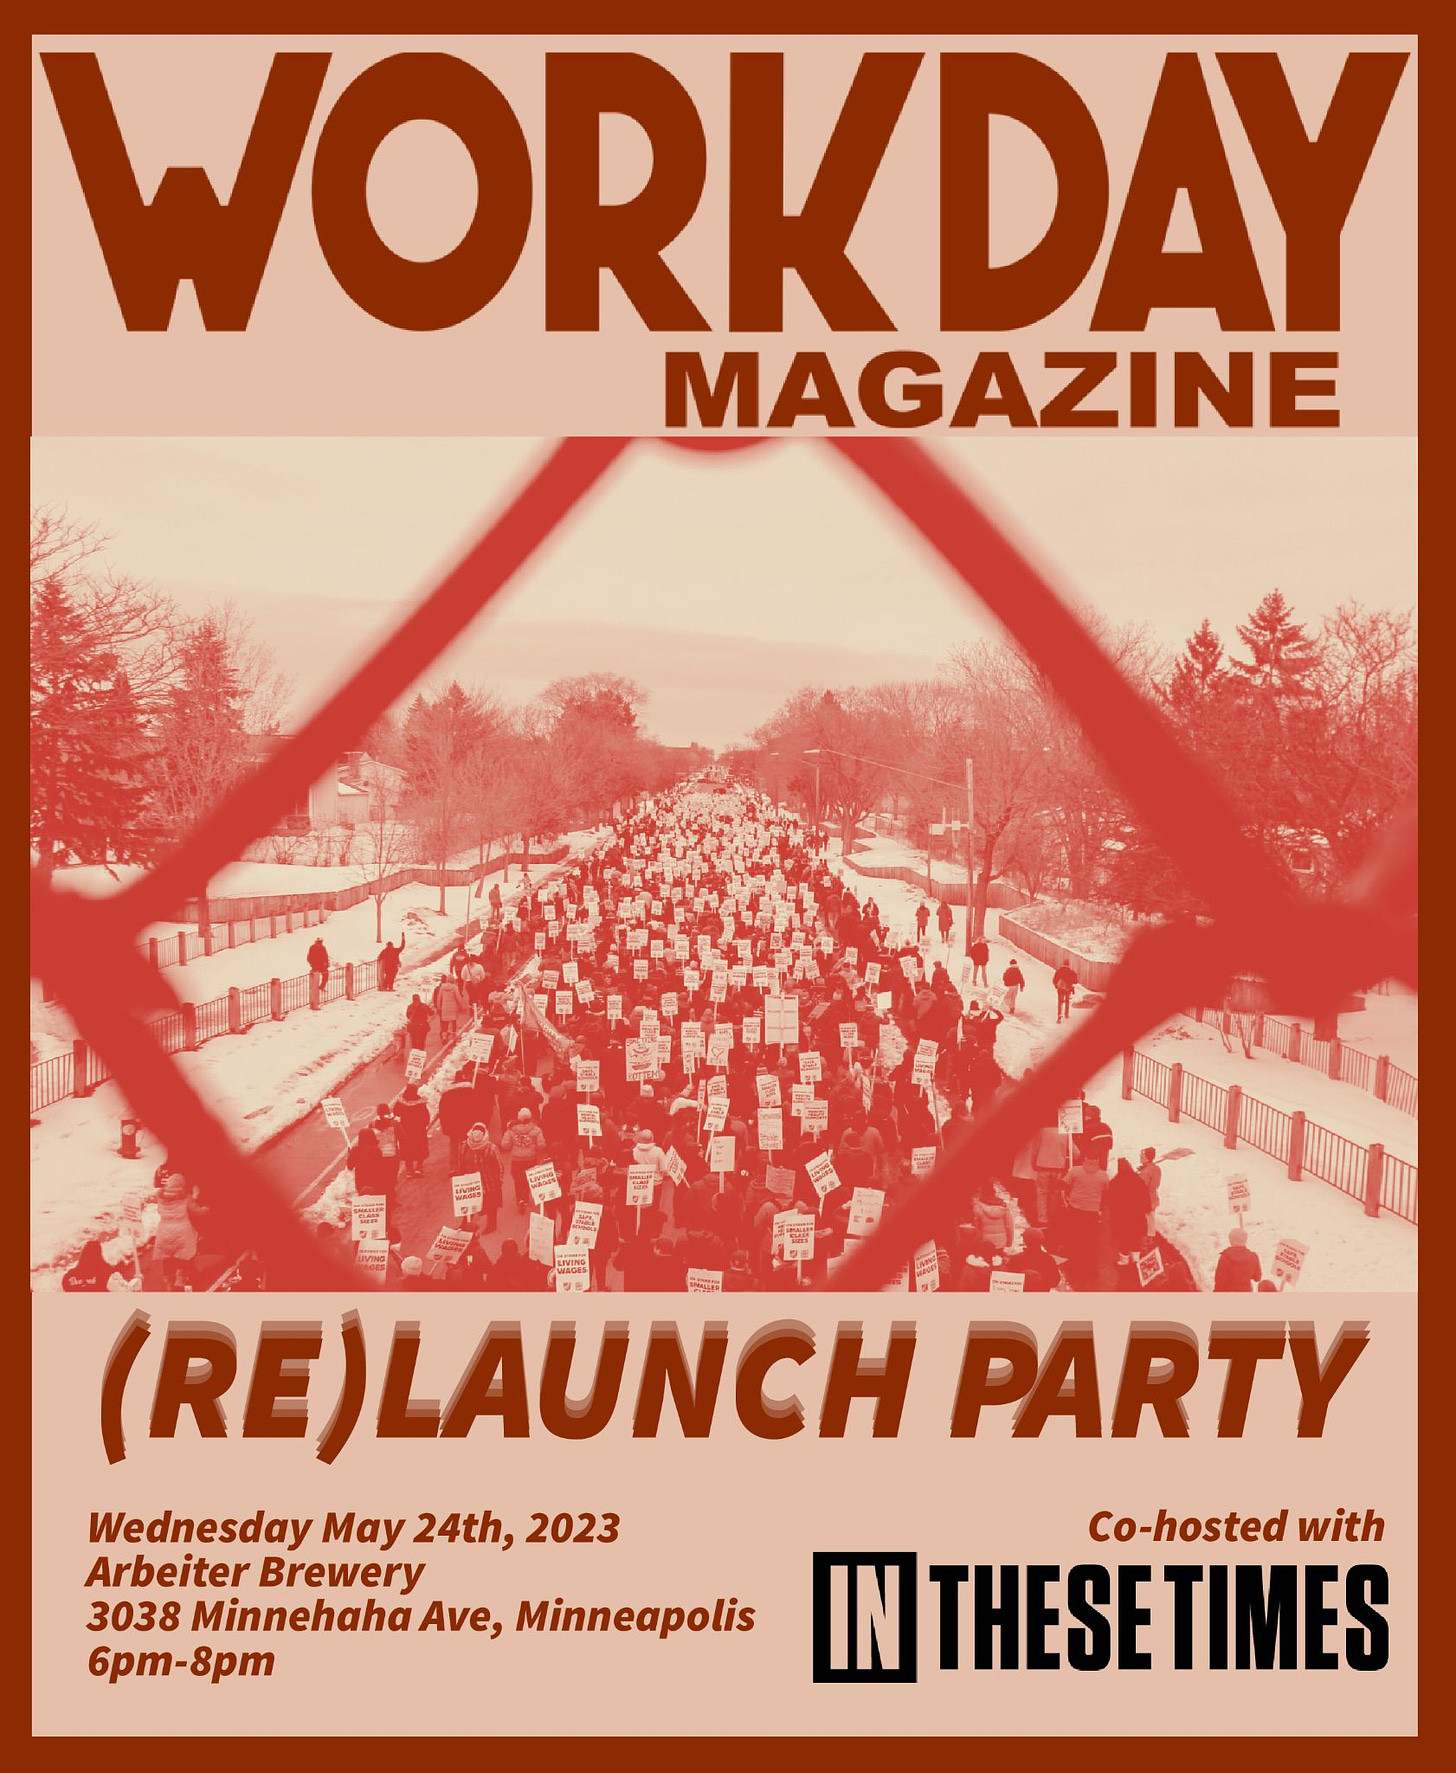 a burnt red and salmon peach graphic shows a party invite with details on location, a photo of a picketing crowd marching through the streets framed by a chain link fence